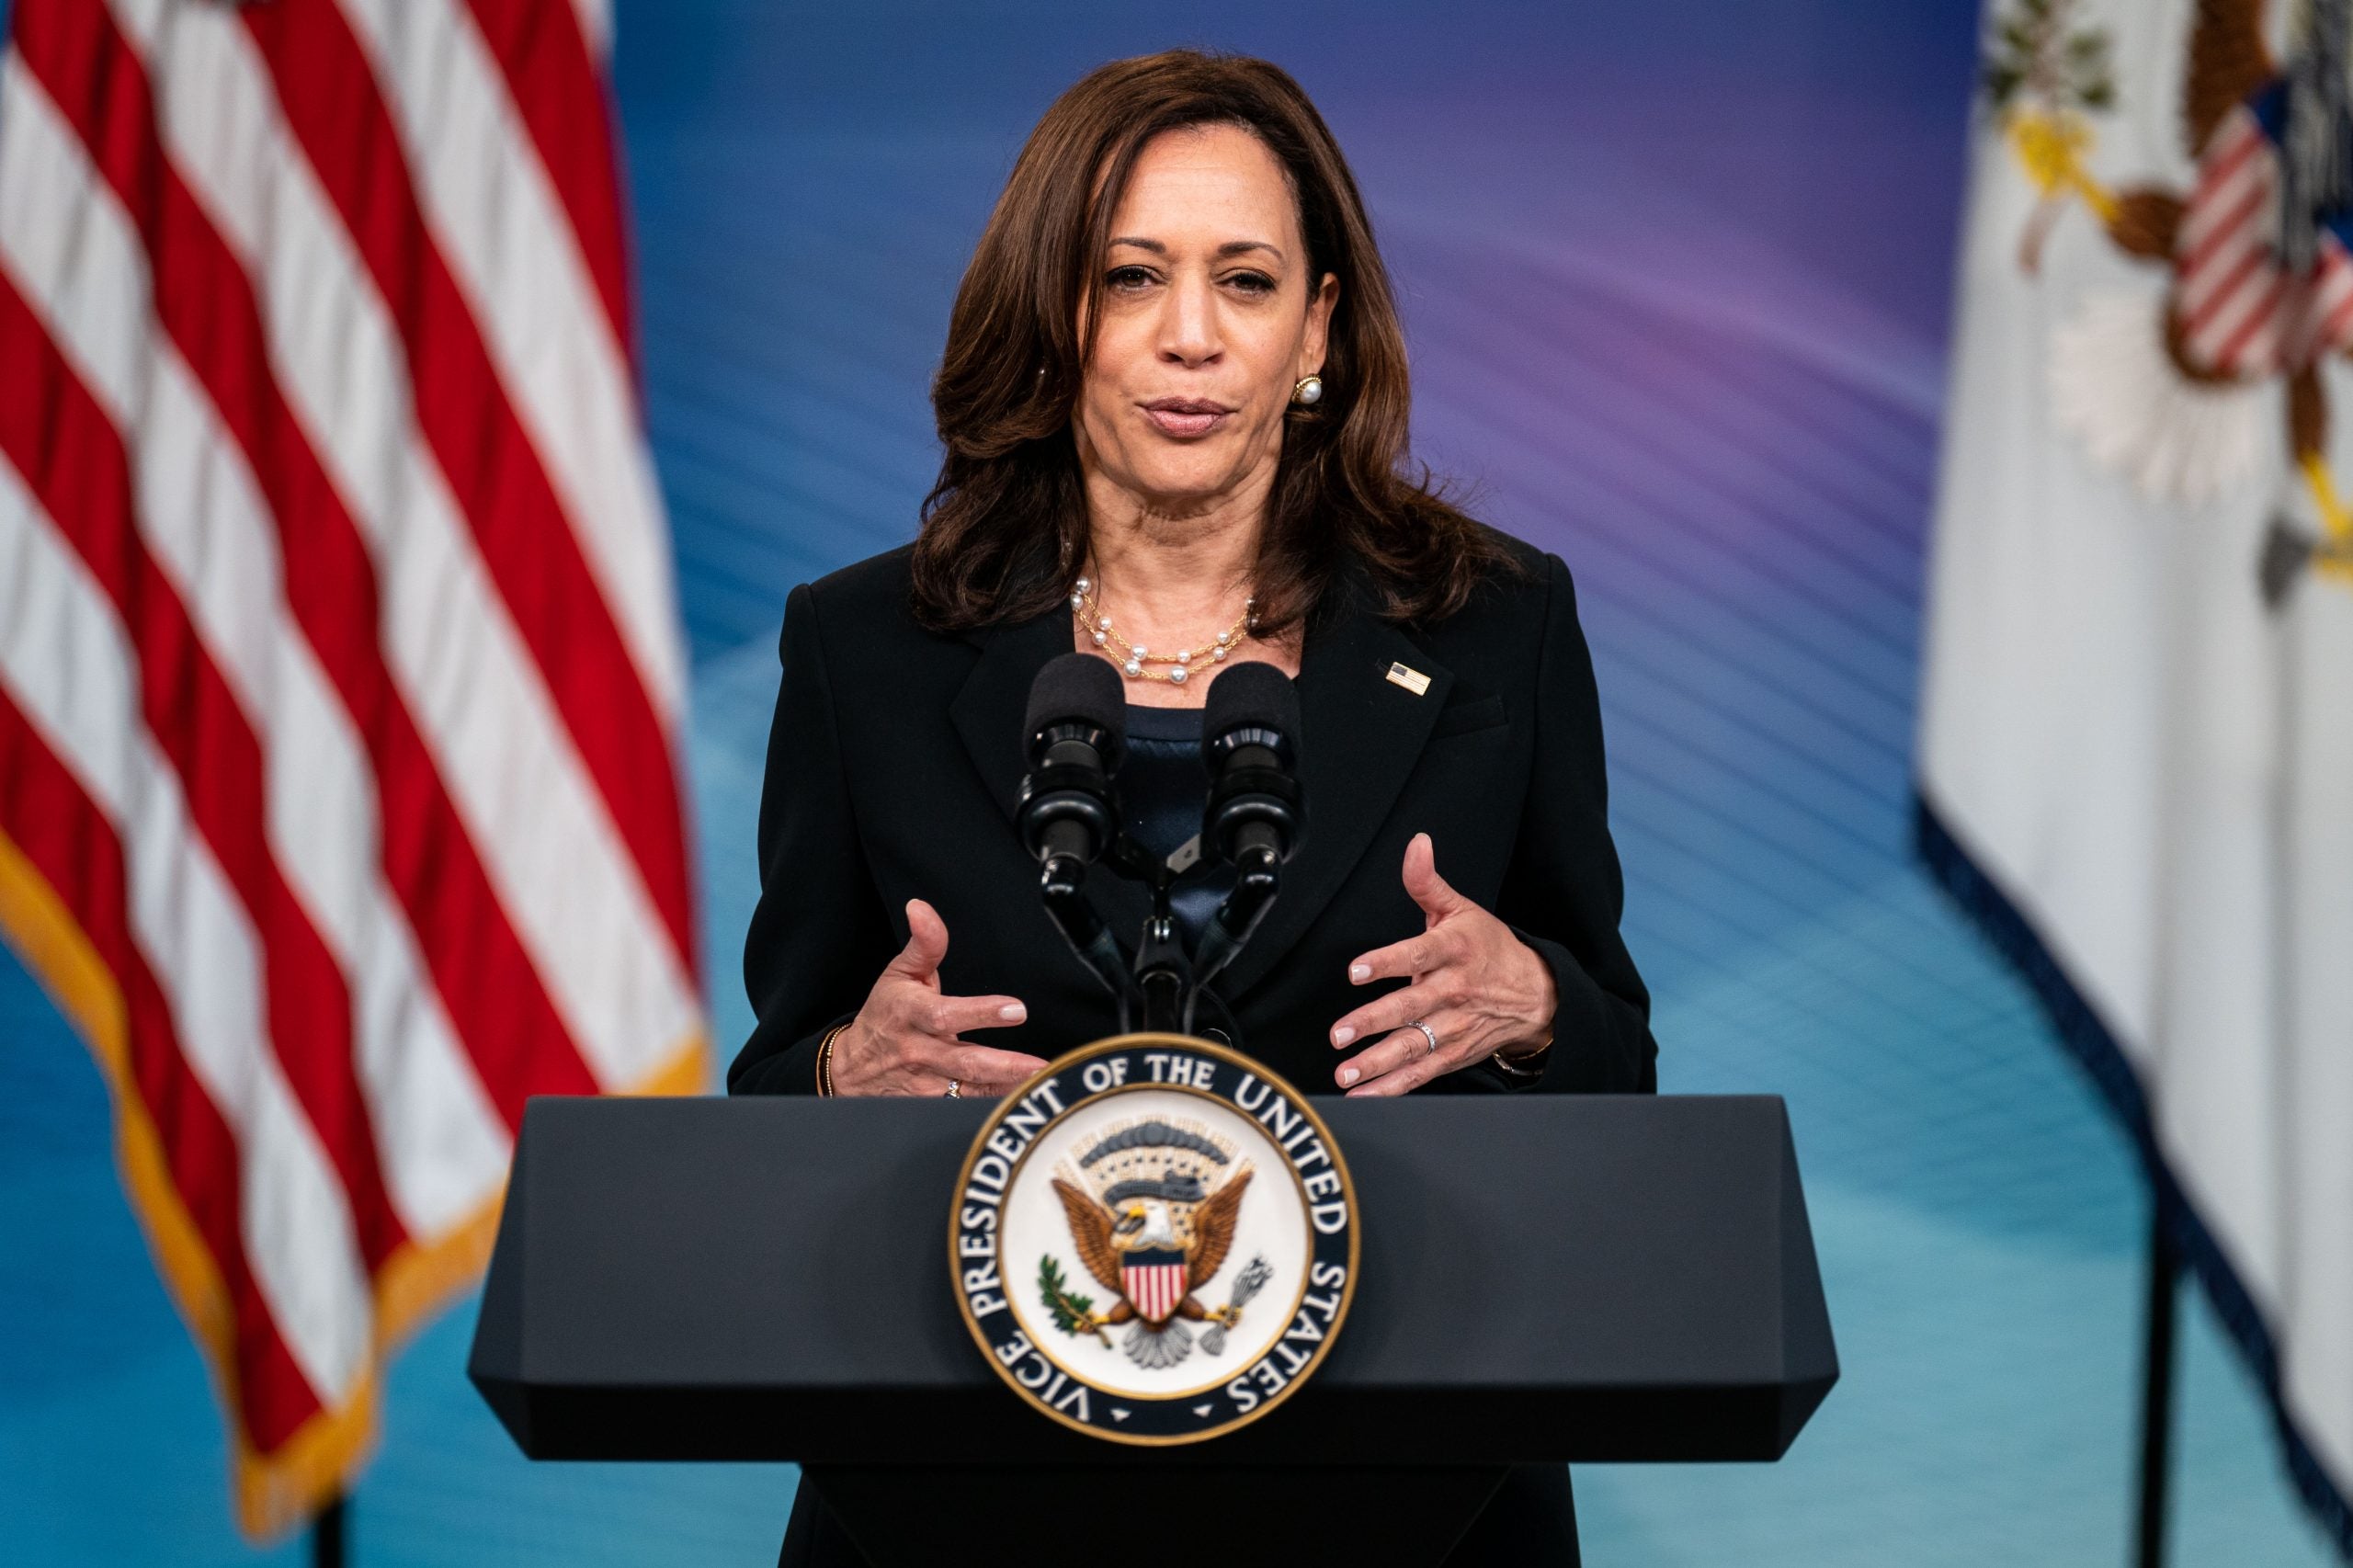 Vice President Kamala Harris to Lead White House Efforts to Protect Voting Rights